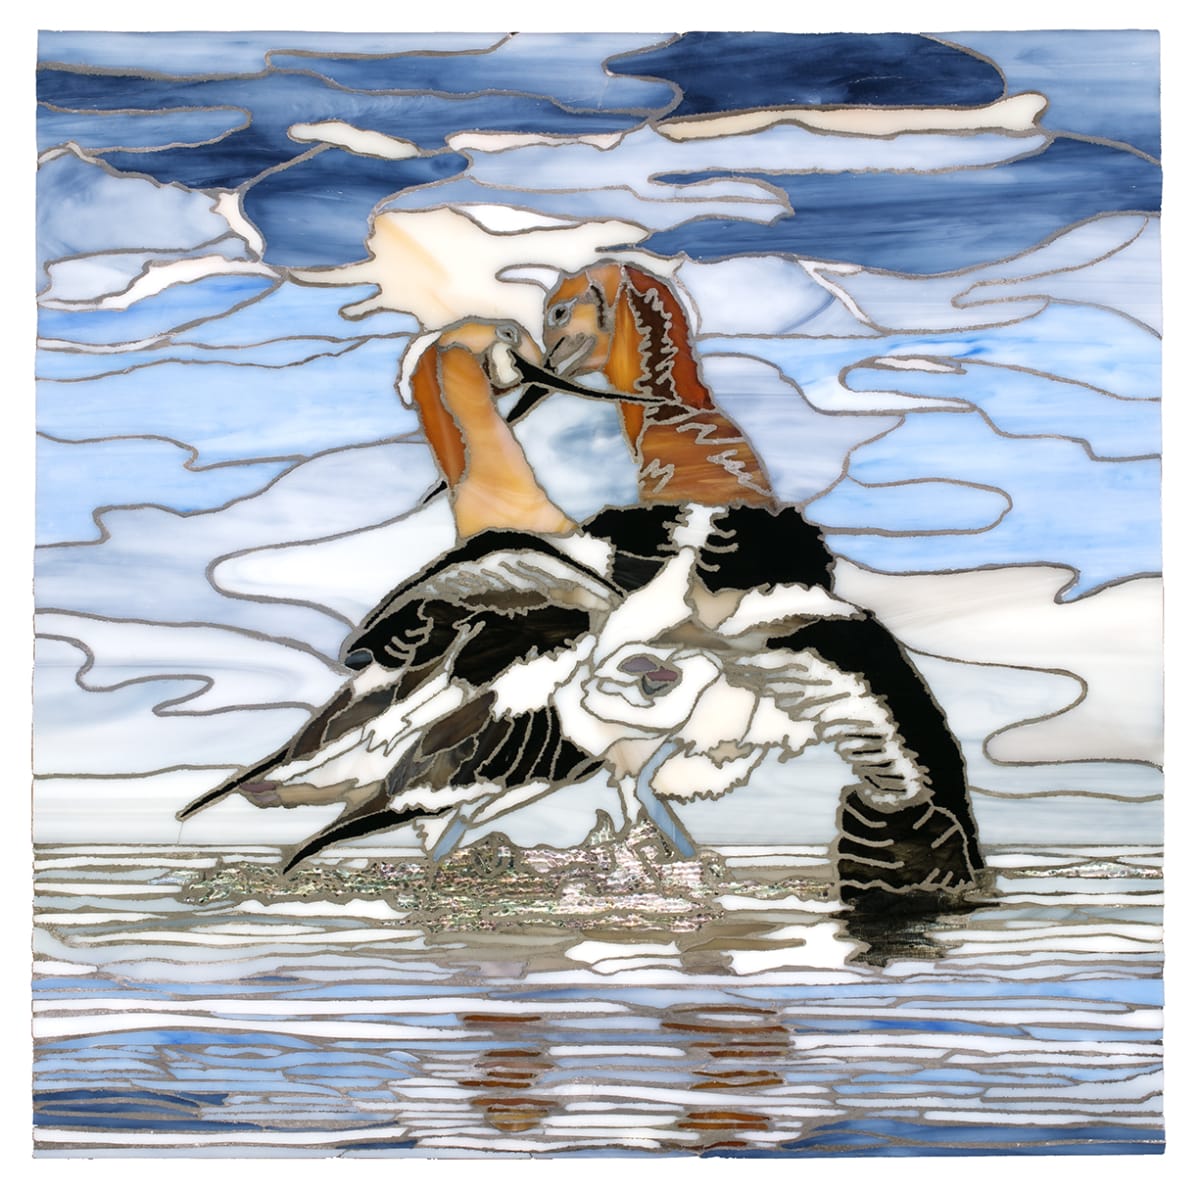 Come Splash-step With Me! by Sue Rose  Image: These American Avocets have morphed their white necks into an attractive russet hue for mating season. They are performing their mating dance! While crossing beaks, the male has swung his wing over her shoulder, holding her close for the dance. He seems to sing, "Come Splash-Step with Me!" 